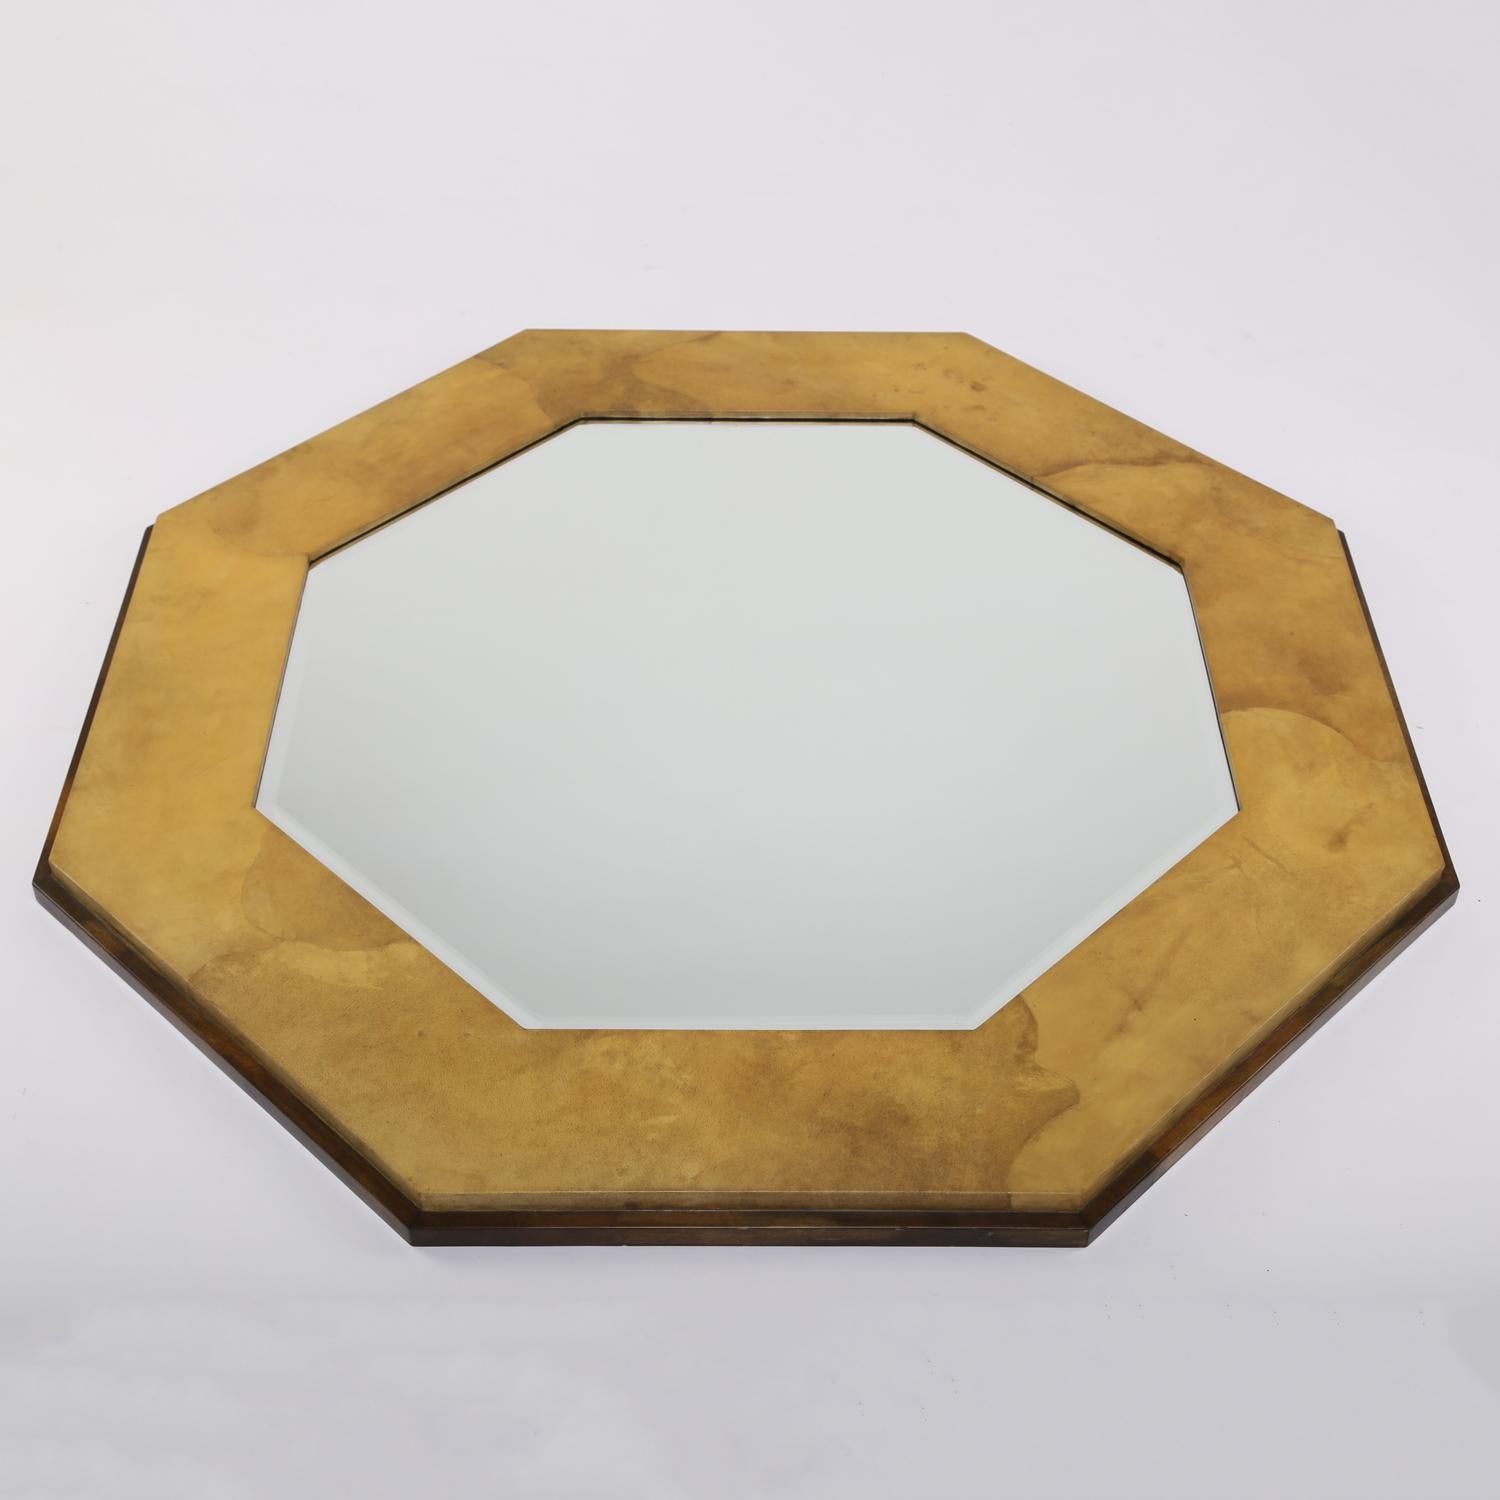 Wall hanging mirror, octagonal with lacquered light goatskin in front of darker lacquered goatskin edge, with beveled mirror inside, by Karl Springer, American, 1970’s. The combination of light and dark lacquered goatskin is beautiful.